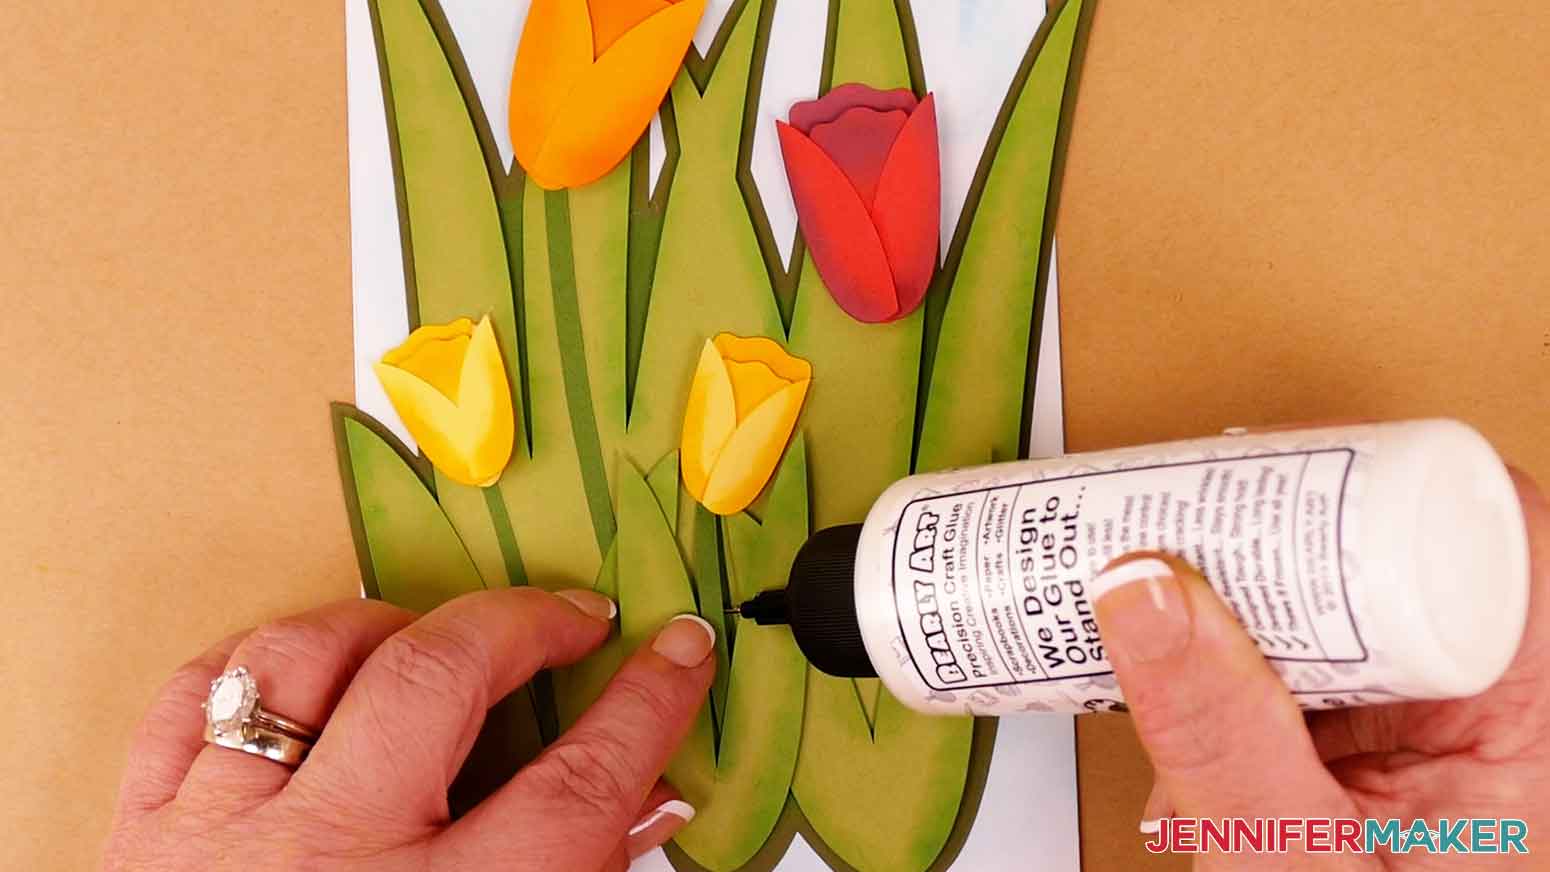 Insert the stems under the flowers and leaves and use small dots of craft glue to secure them in place.